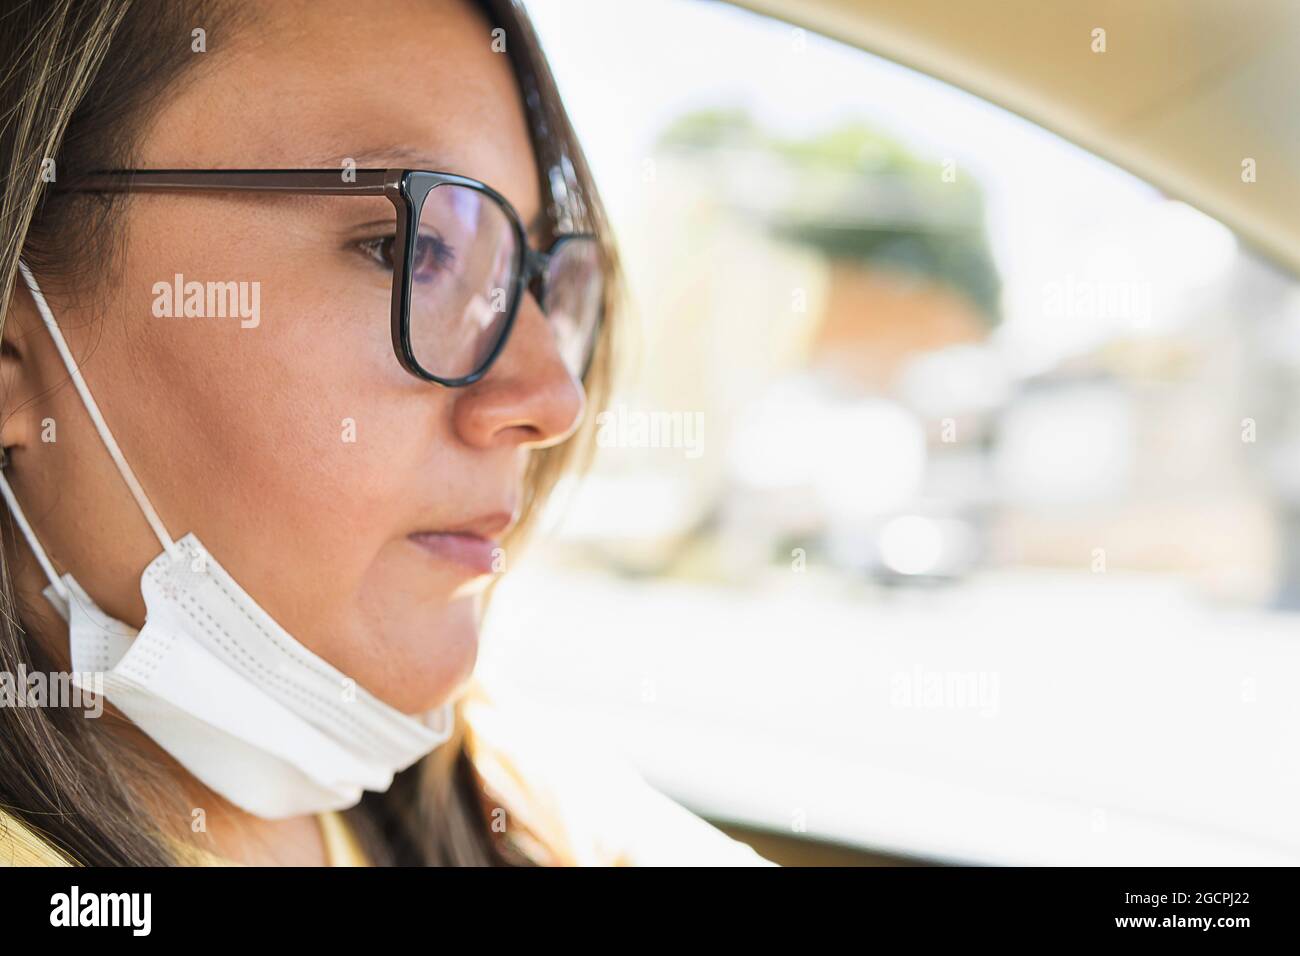 portrait of latin woman with glasses driving with her mask taken off Stock Photo